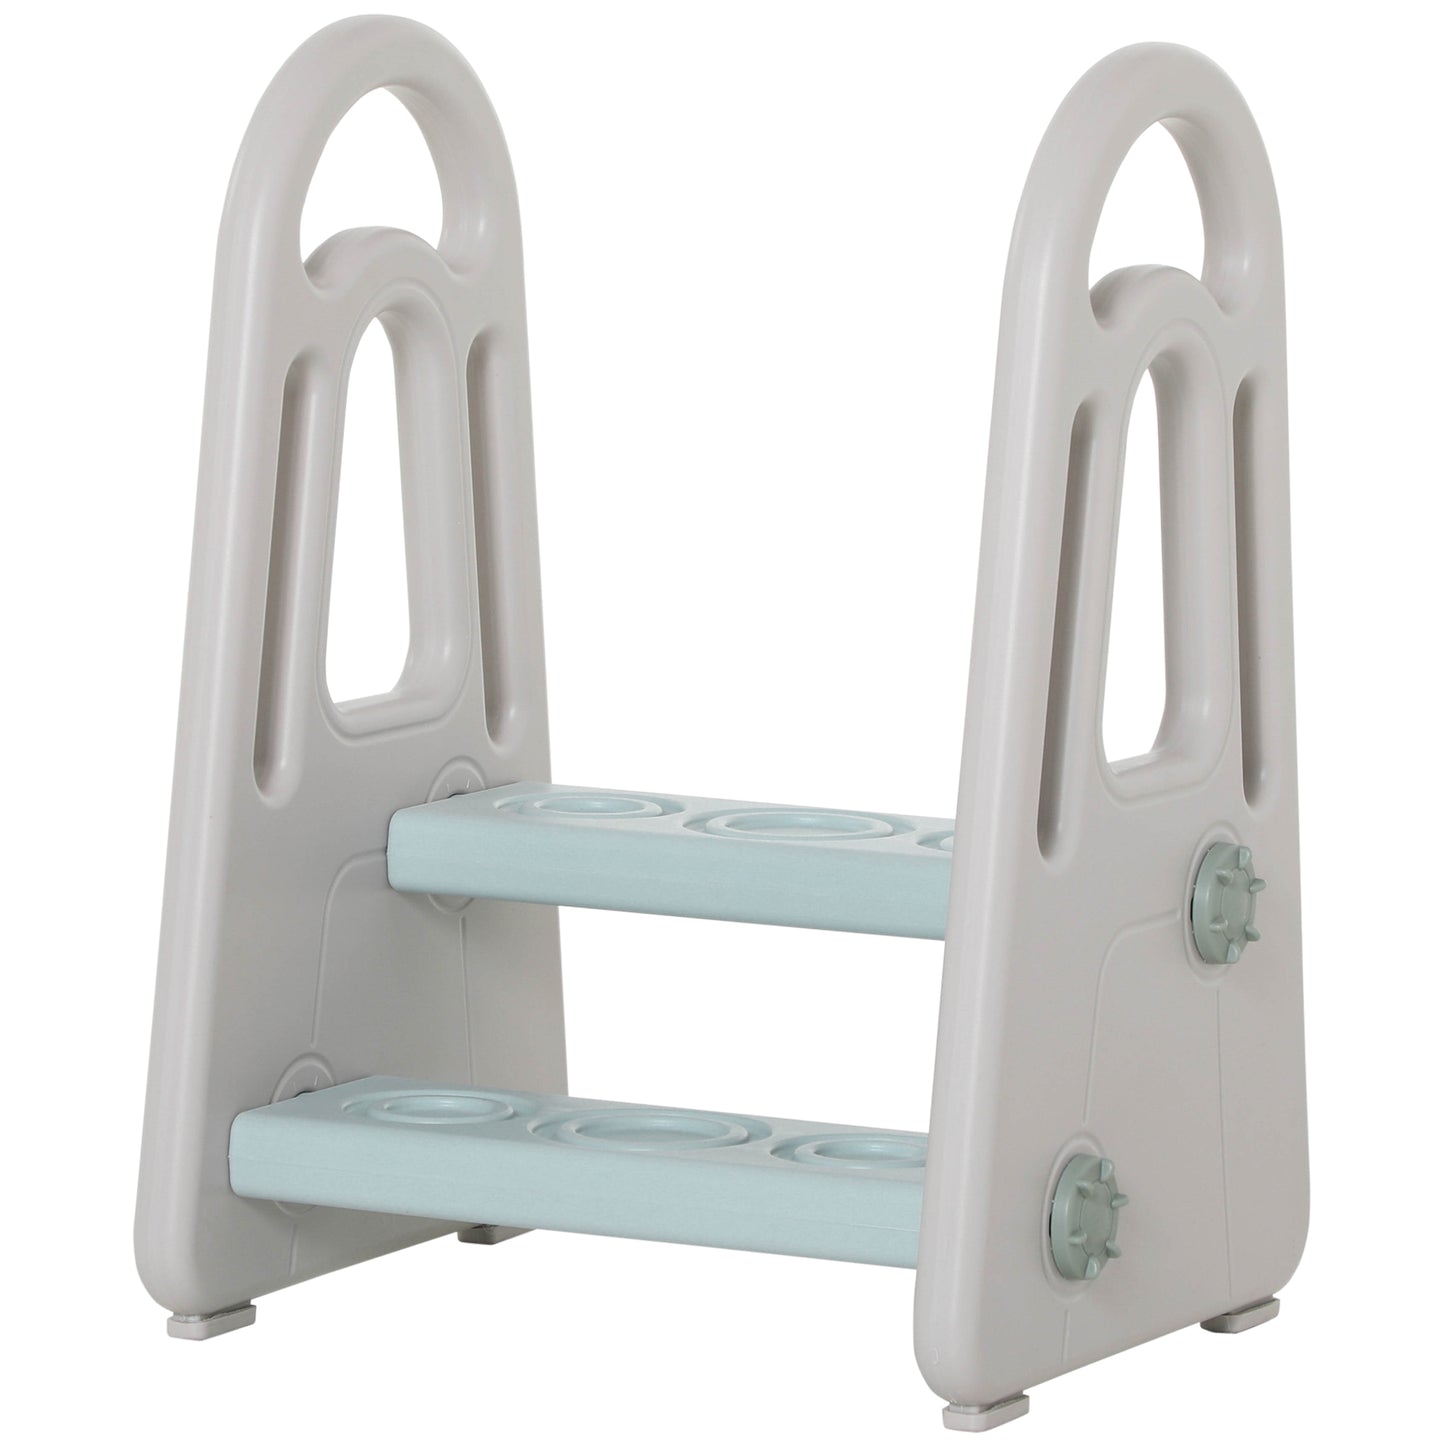 HOMCOM Two-Step Stool for Kids Toddlers with Handle for Toilet Potty Training